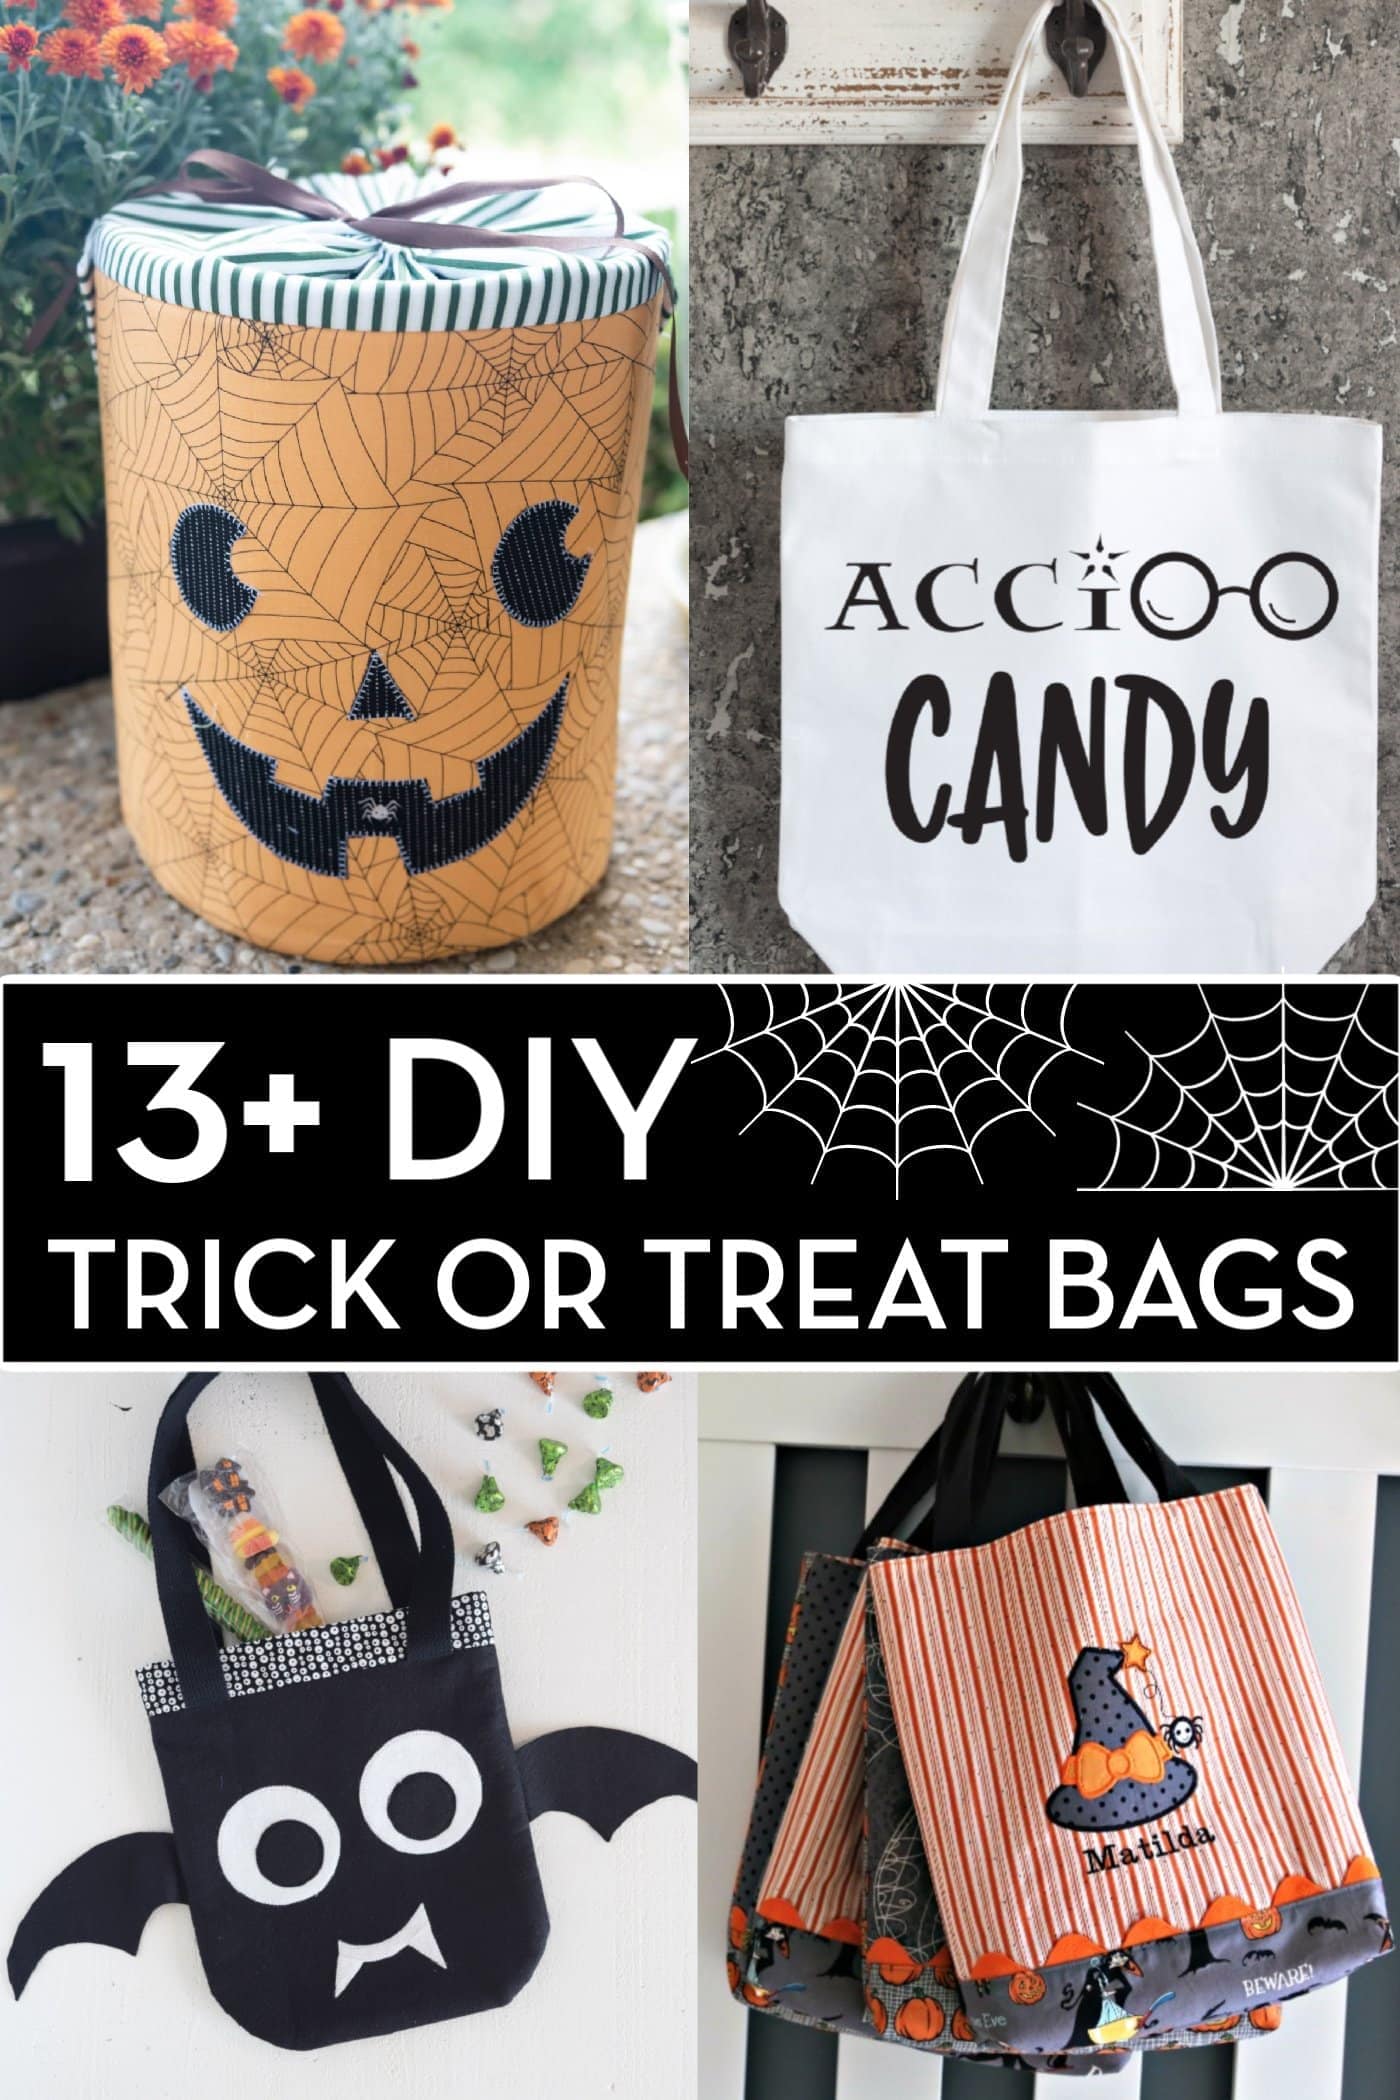 4,6,8 &10 Fabric Treat Bags for Halloween Trick or Treat Bags kids pack of 2